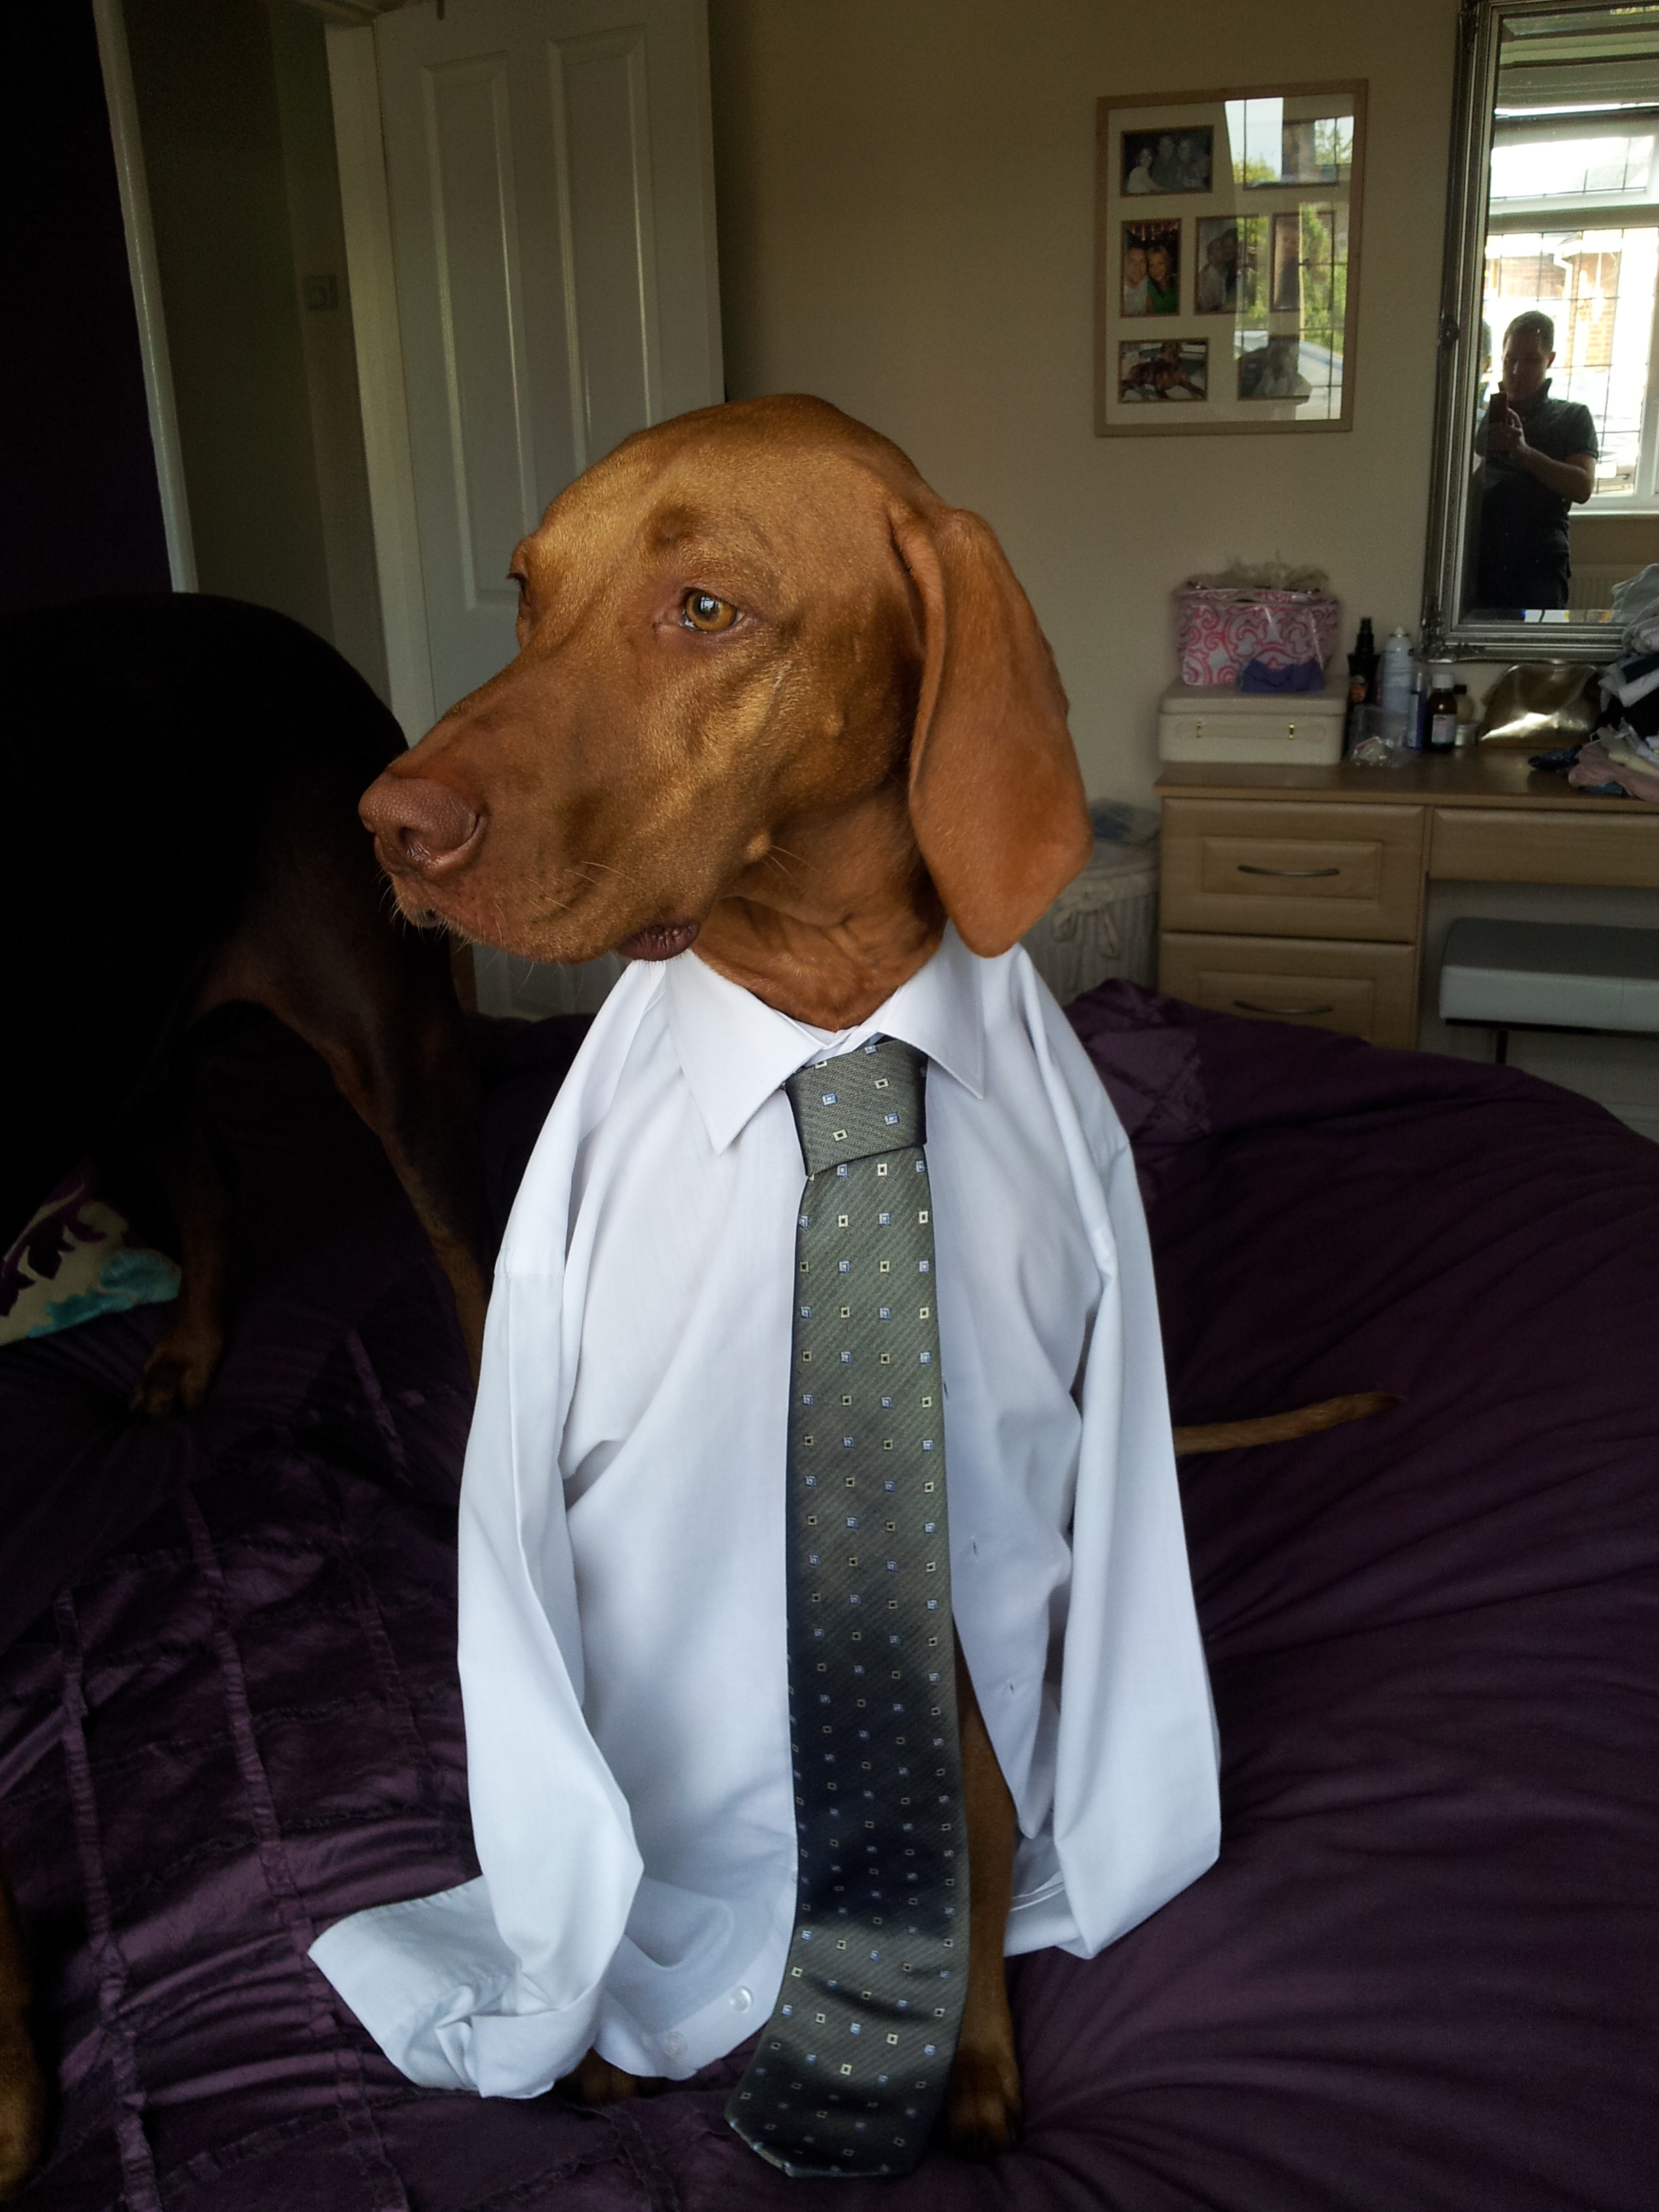 Oscar the dog in a shirt and tie